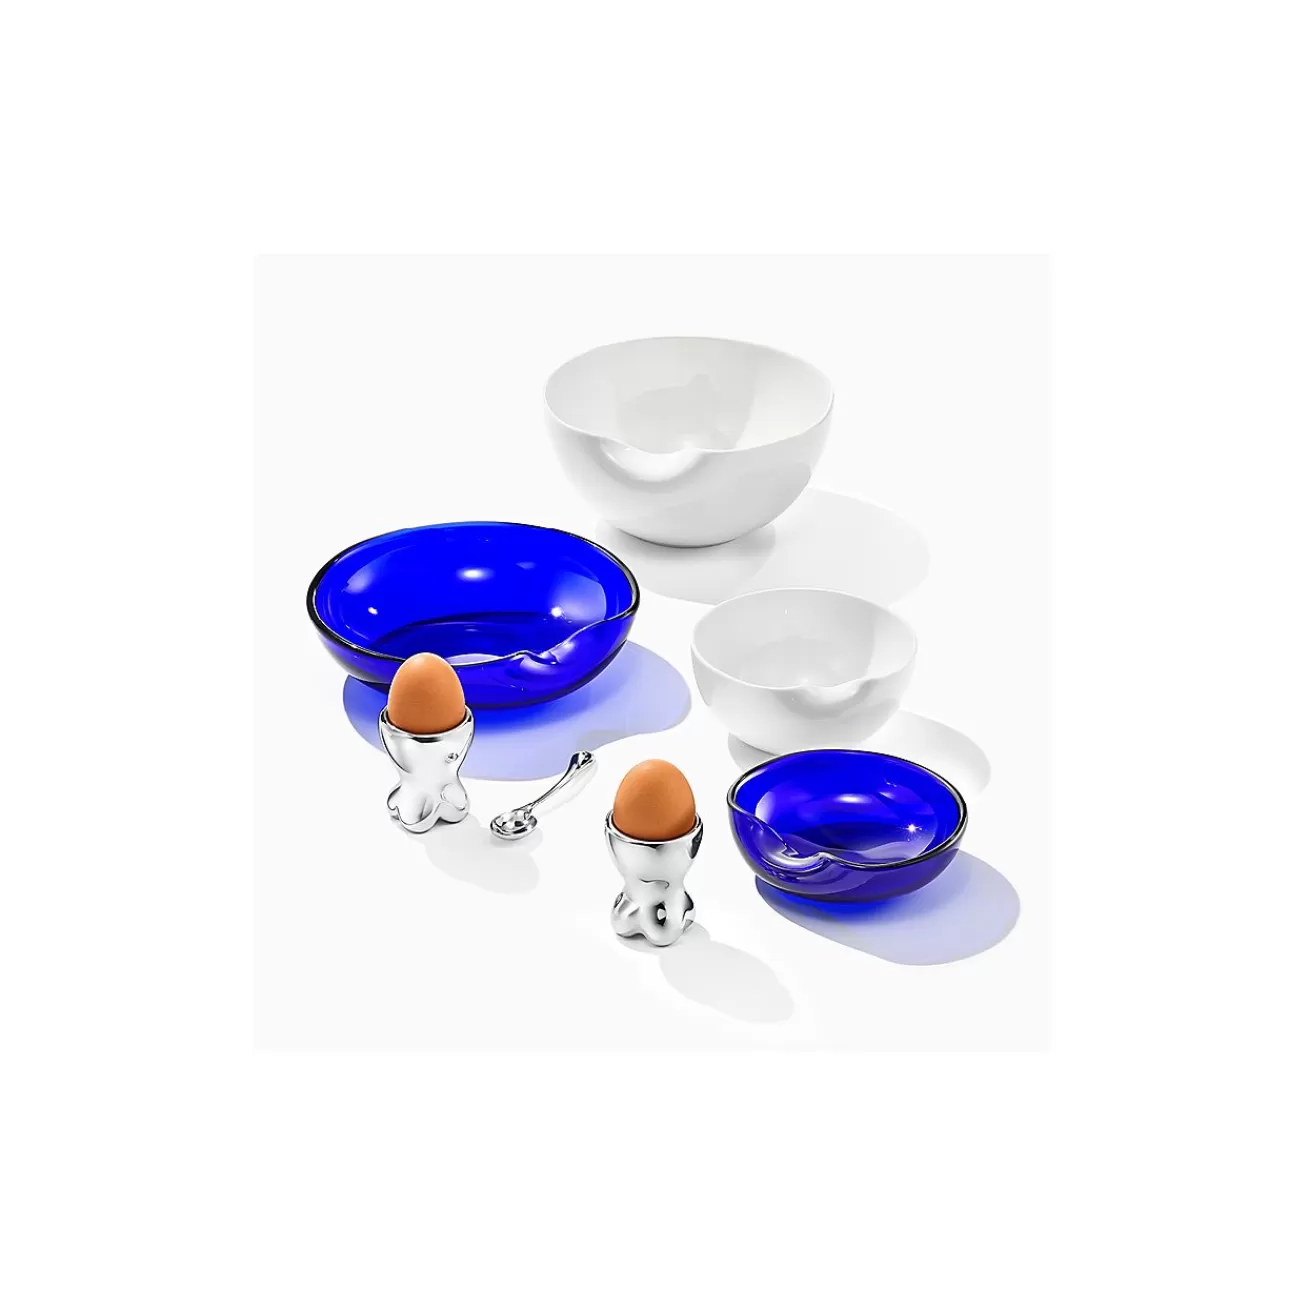 Tiffany & Co. Elsa Peretti® Thumbprint bowl in cobalt glass. More sizes available. | ^ The Home | Housewarming Gifts